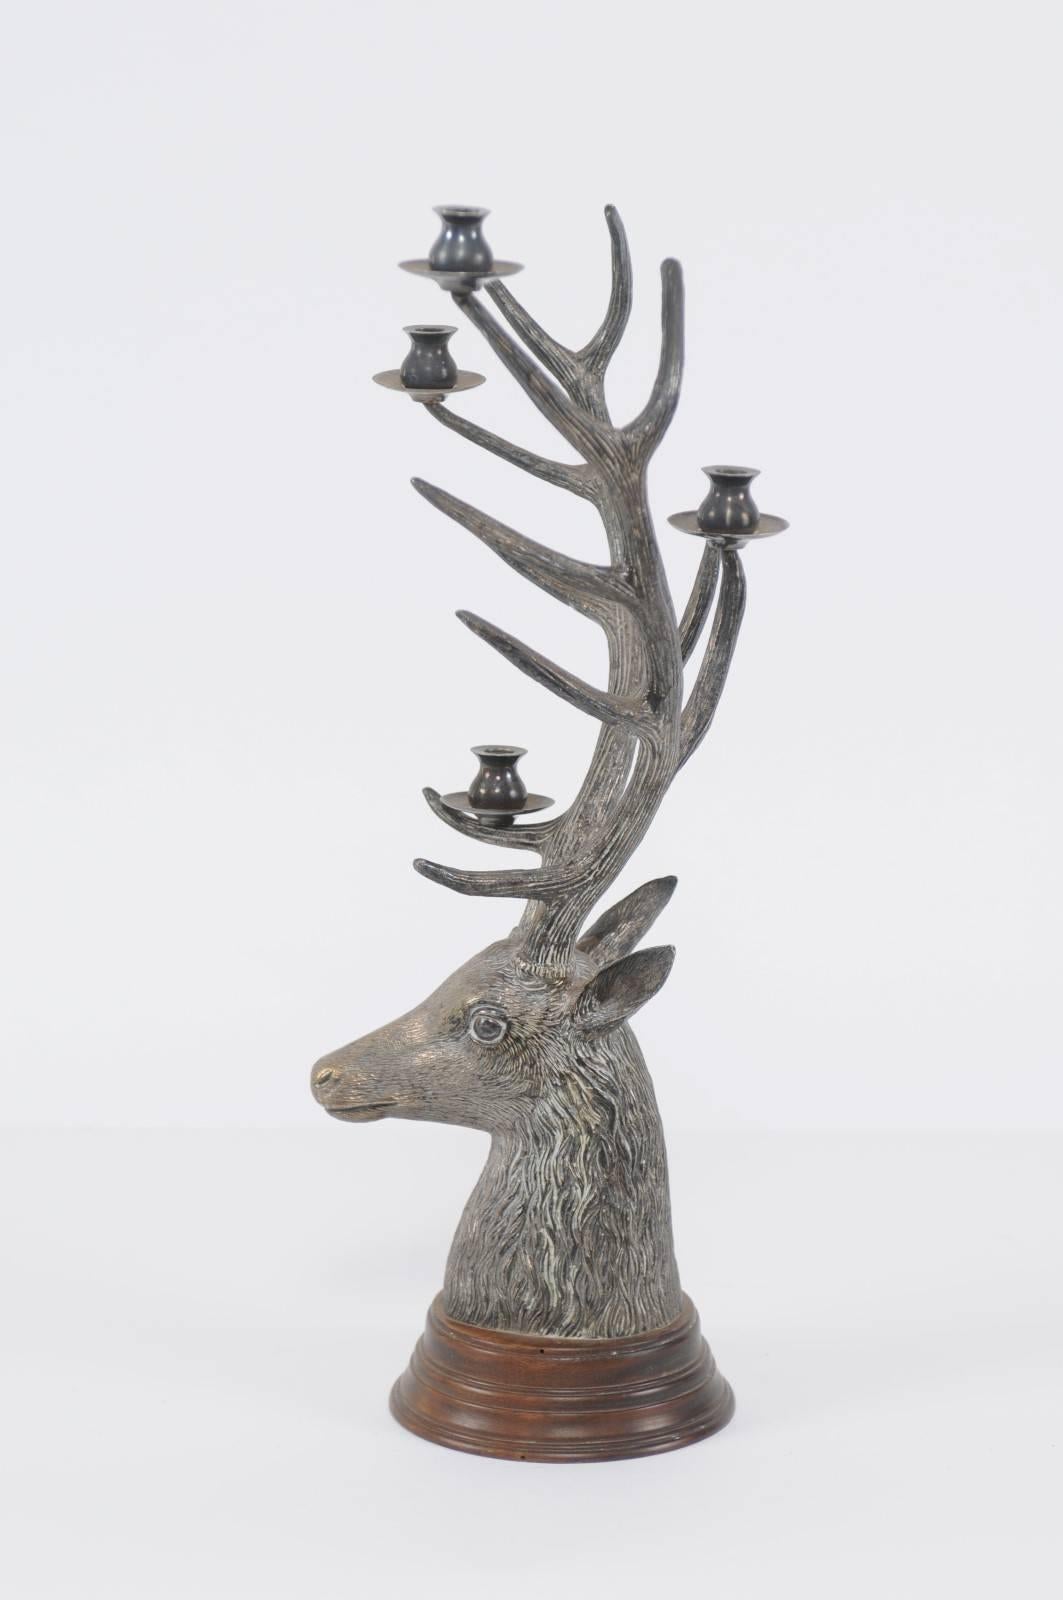 20th Century French Vintage Bronze Candelabra Depicting a Buck Head with Tall Antlers, 1950s